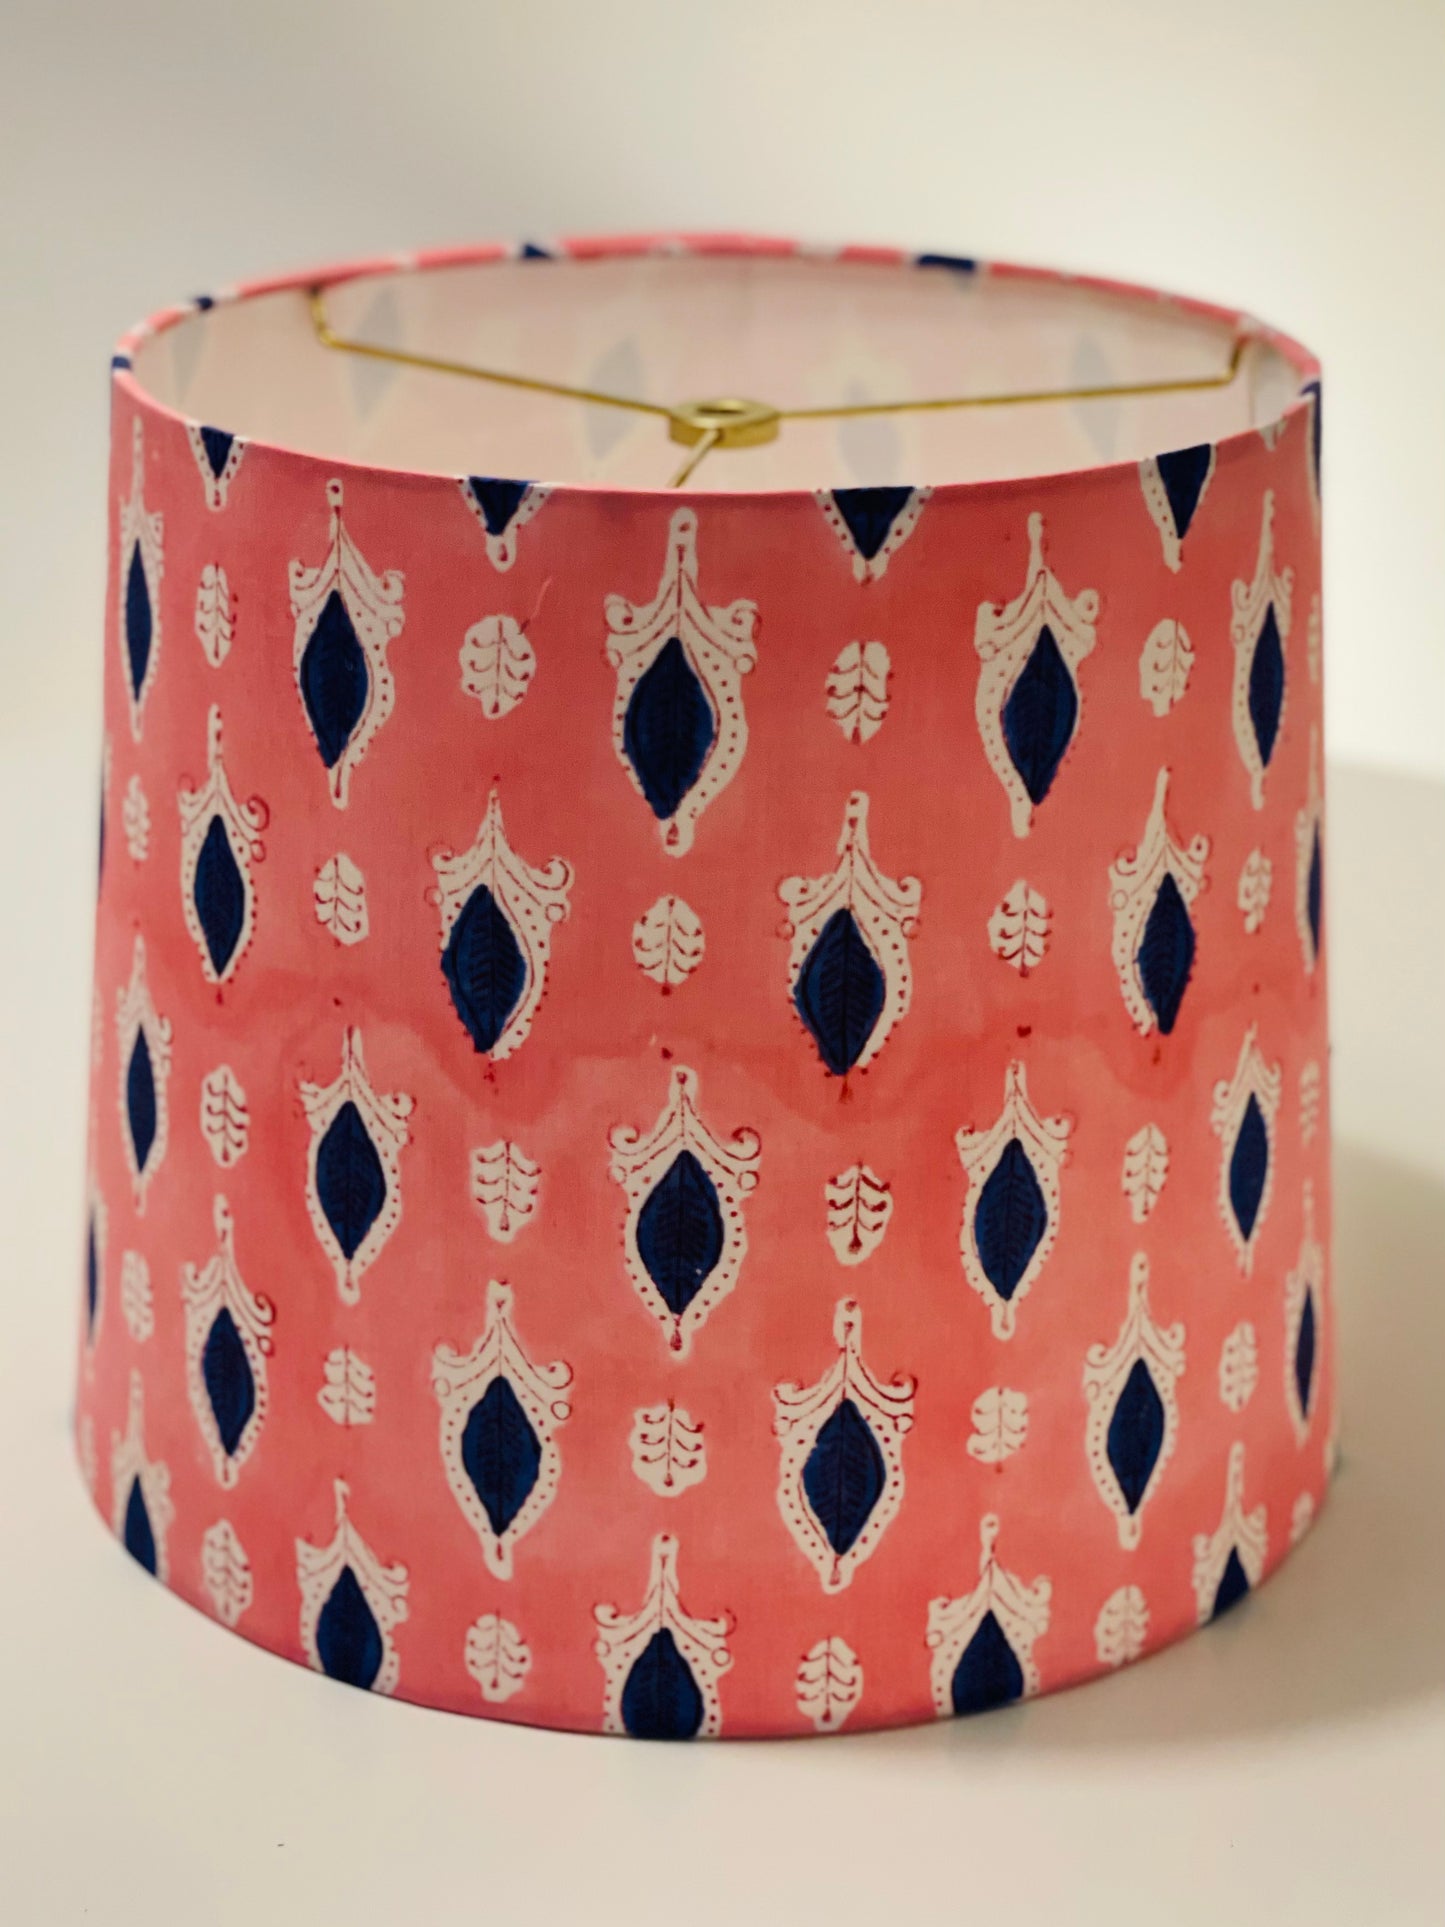 Medium Empire Lampshade. Indian Block print from Jaipur. Rosy Pink with Navy and White.